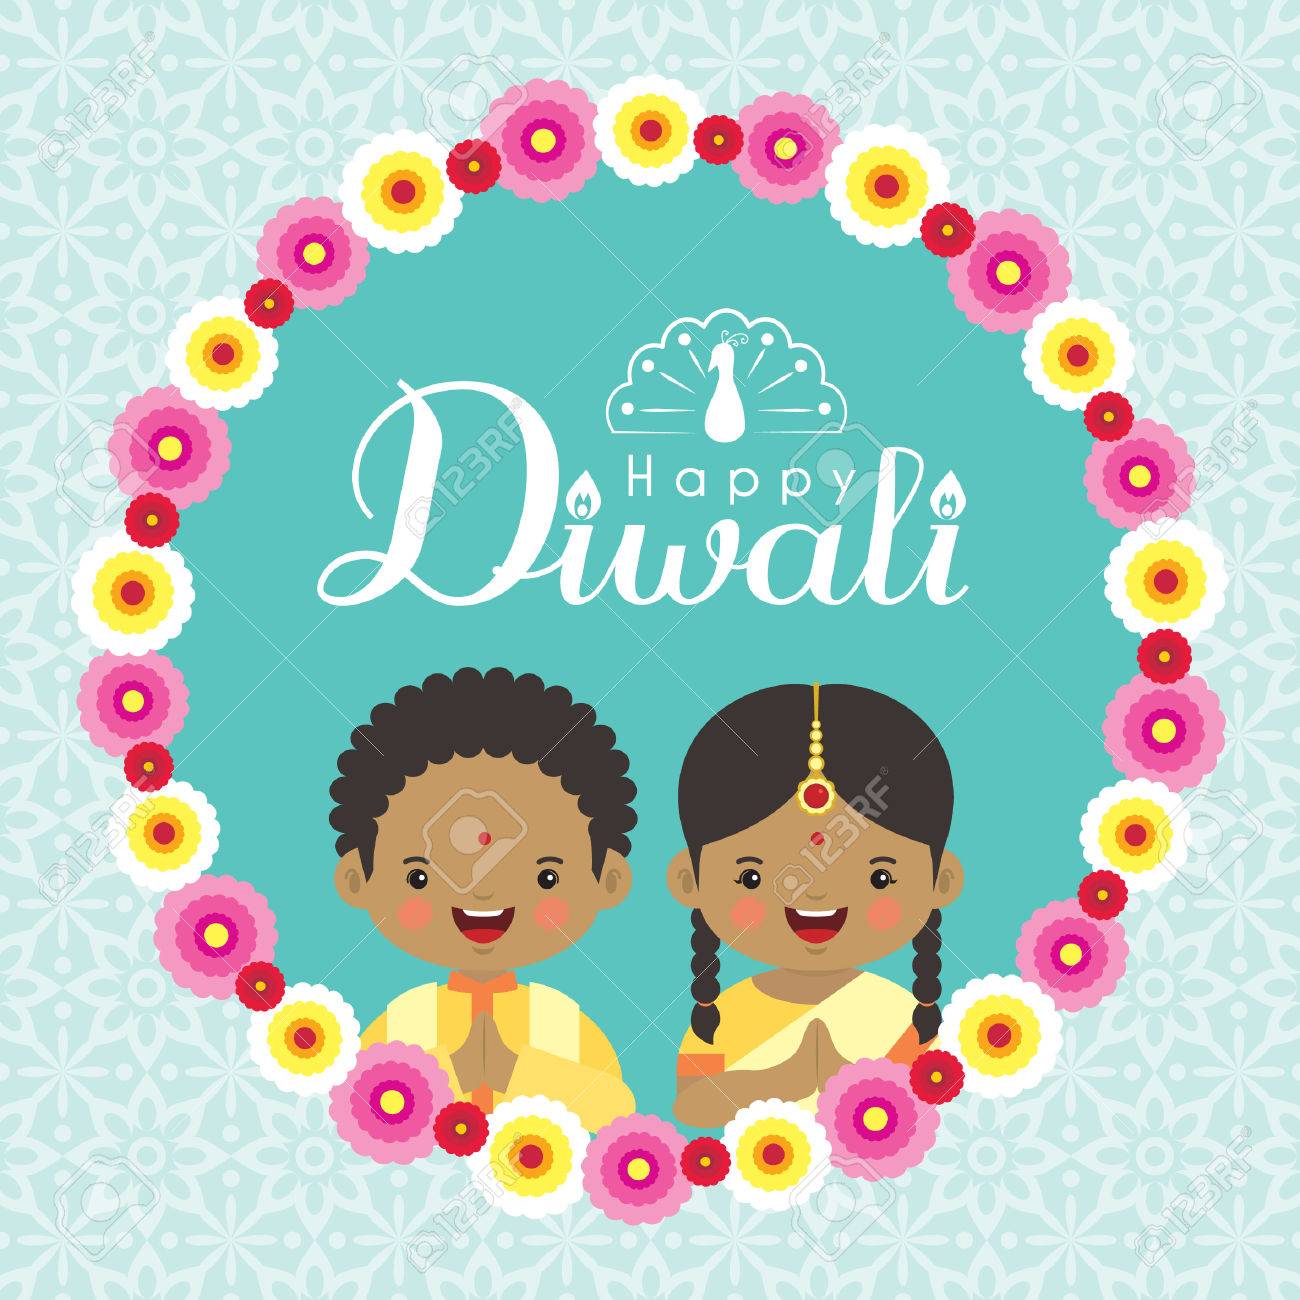 Diwali Or Deepavali Greeting Cardd With Cute India Kids And Floral